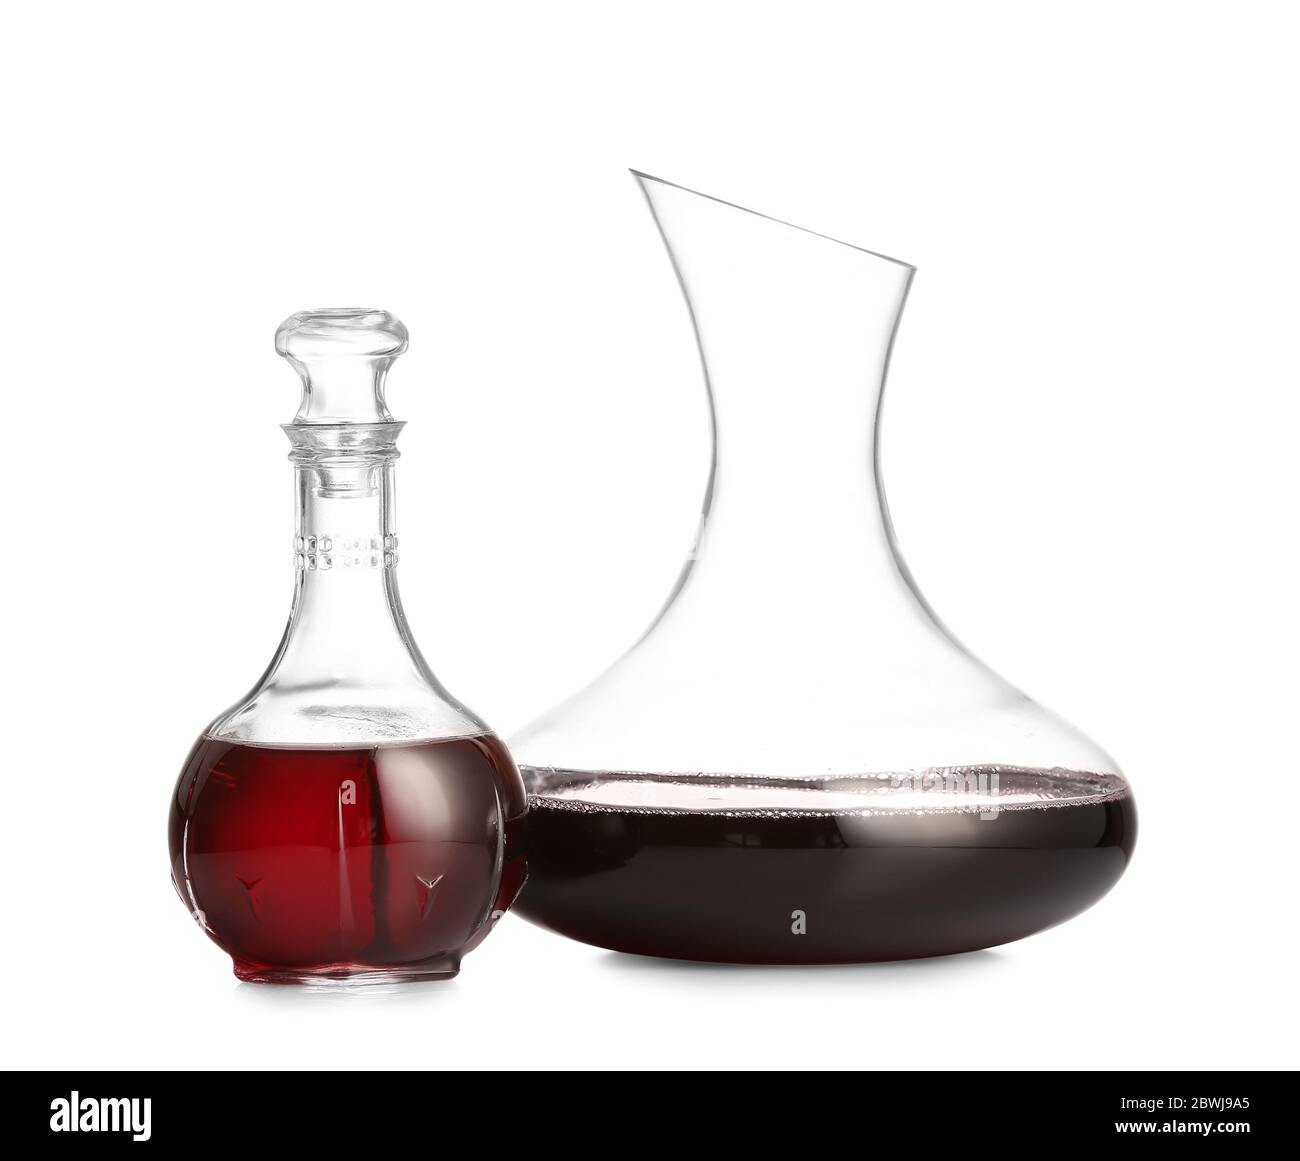 Decanters of wine on white background Stock Photo